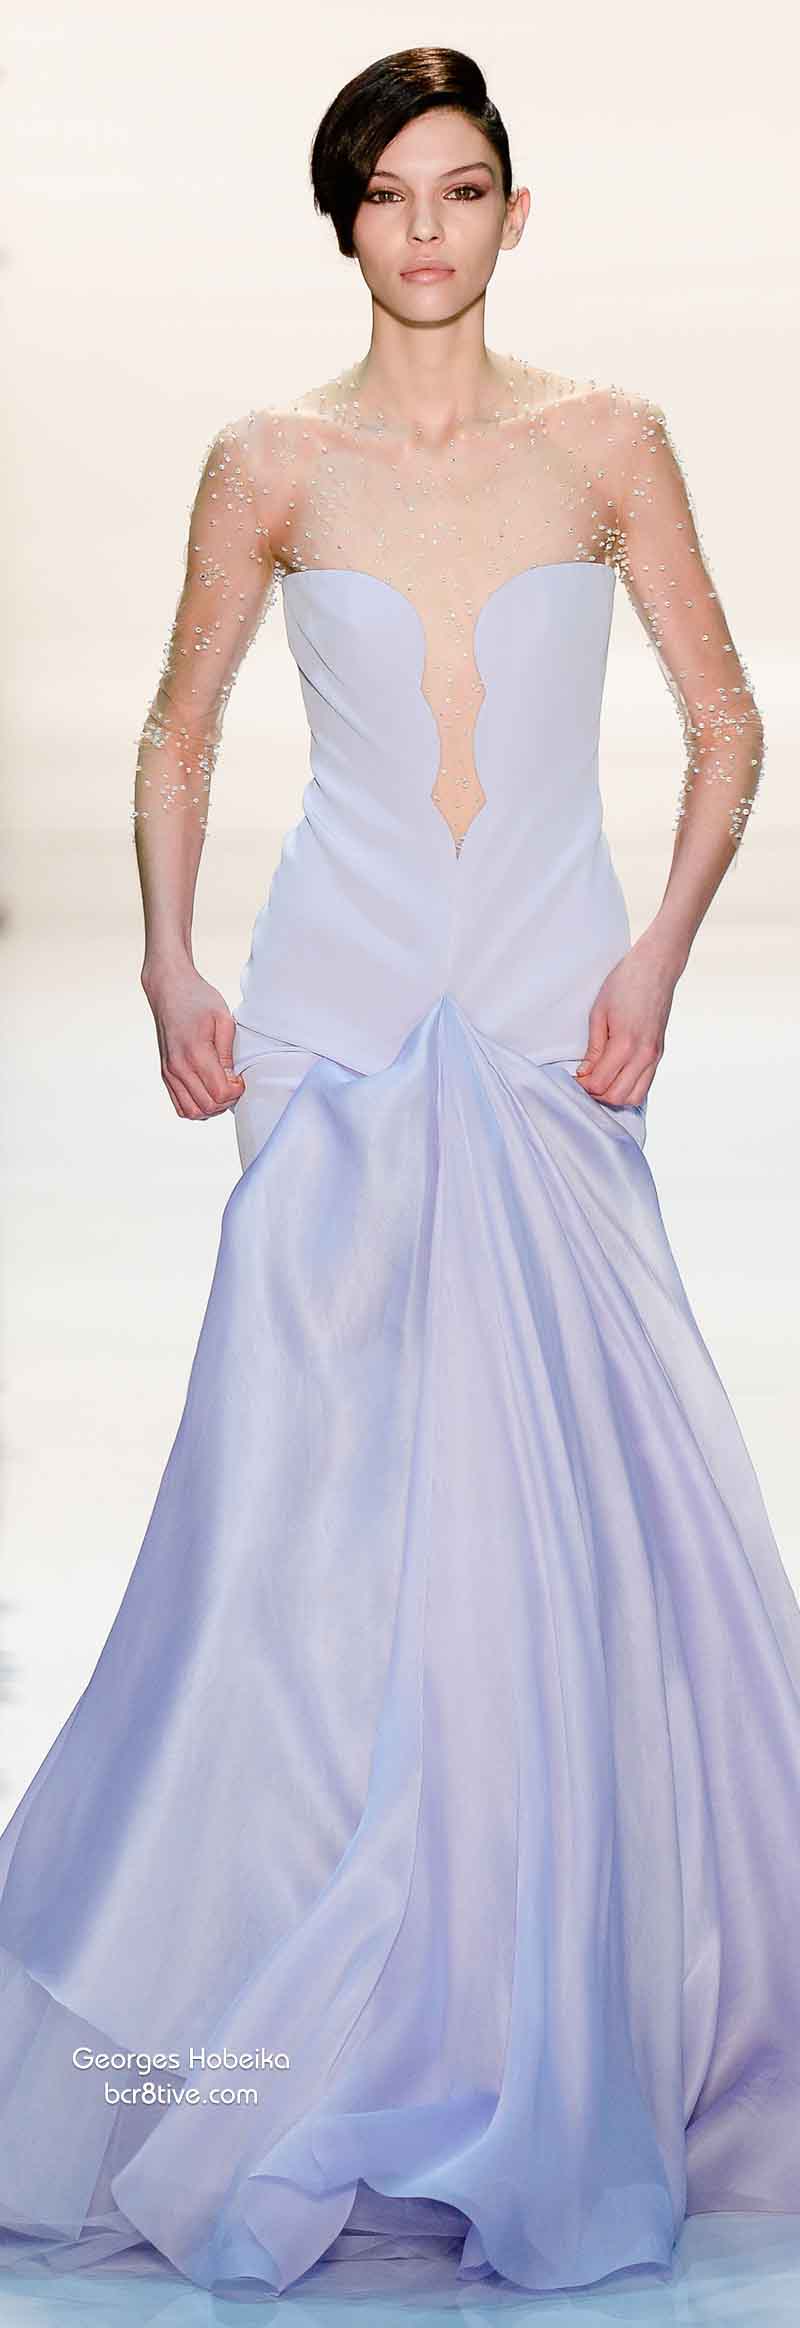 Georges Hobeika Spring 2014 Couture – Be Creative